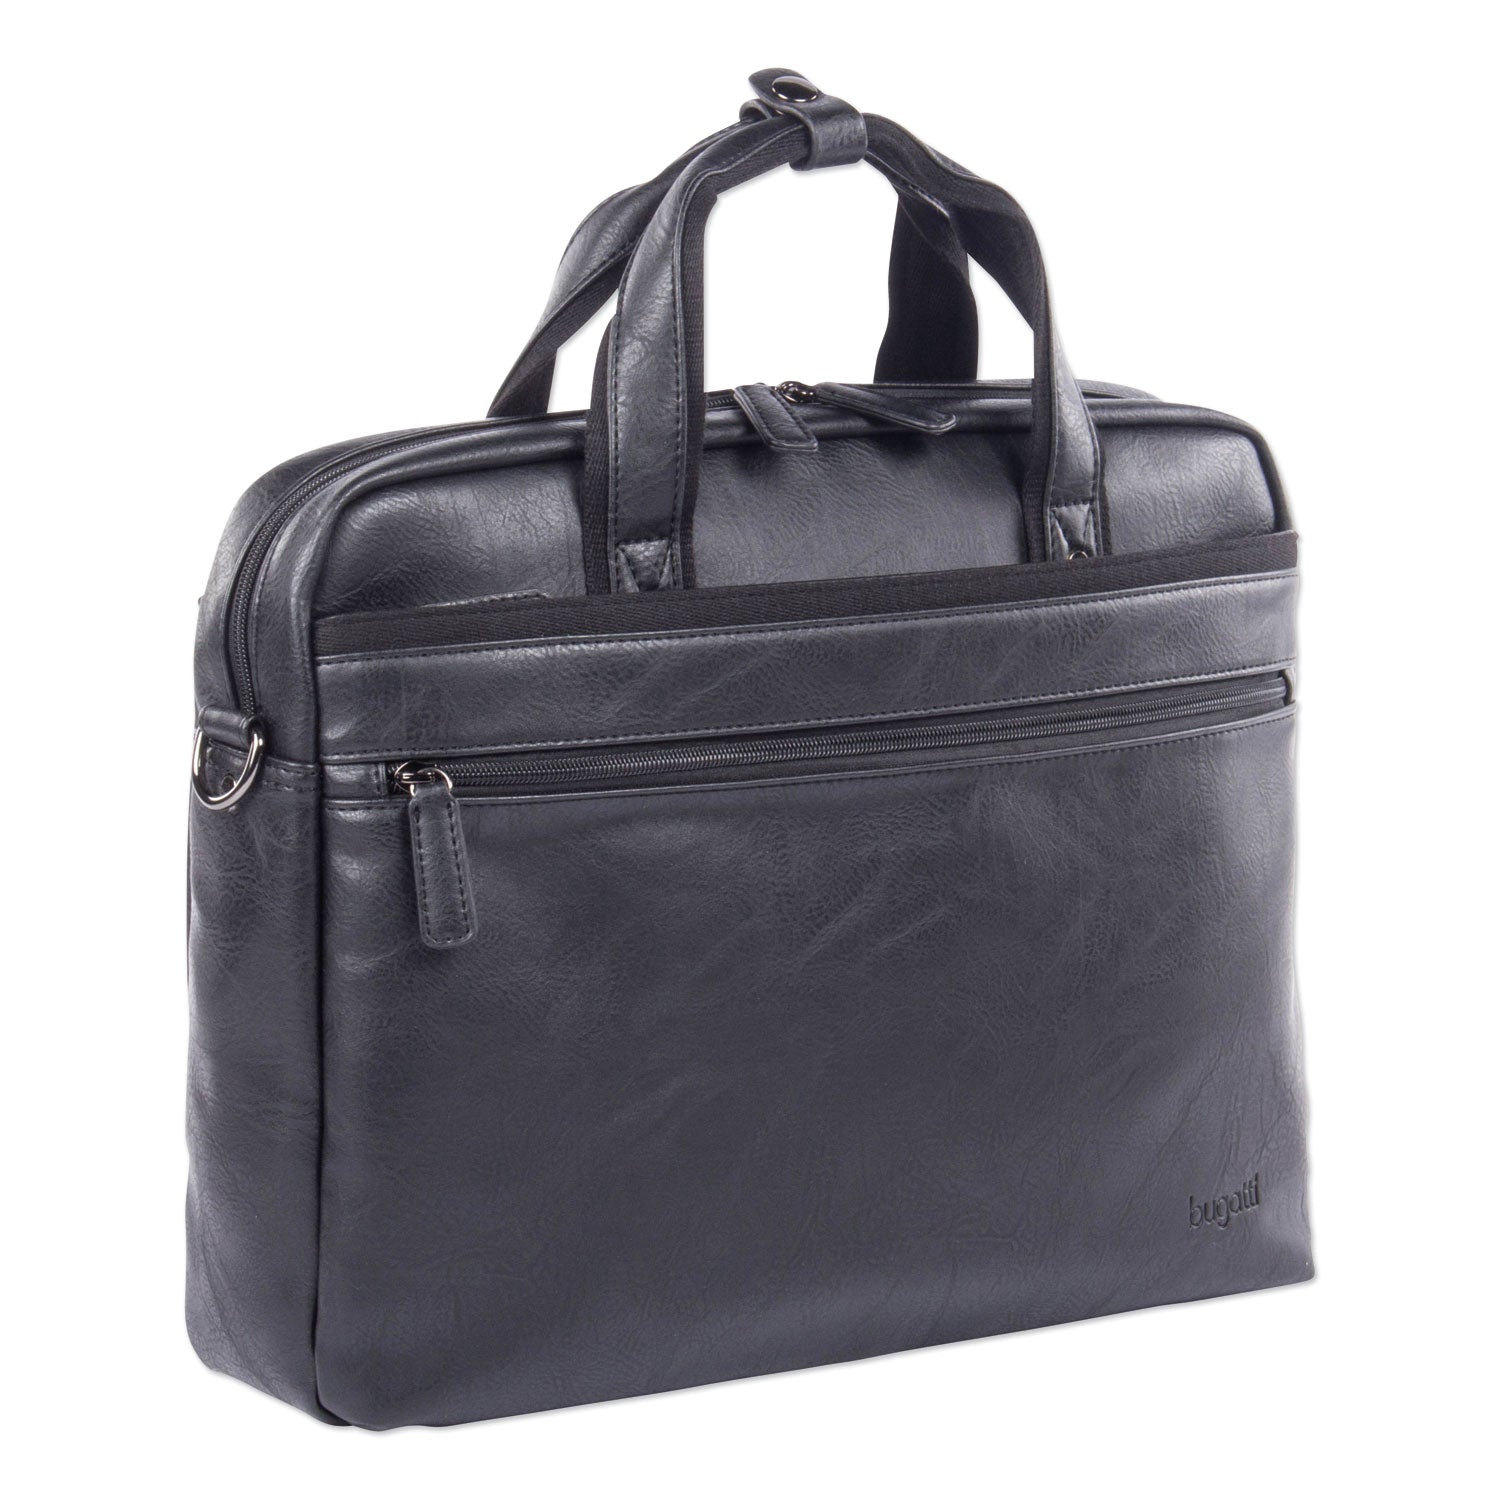 valais-executive-briefcase-fits-devices-up-to-156-leather-475-x-475-x-115-black_swzexb532smbk - 1